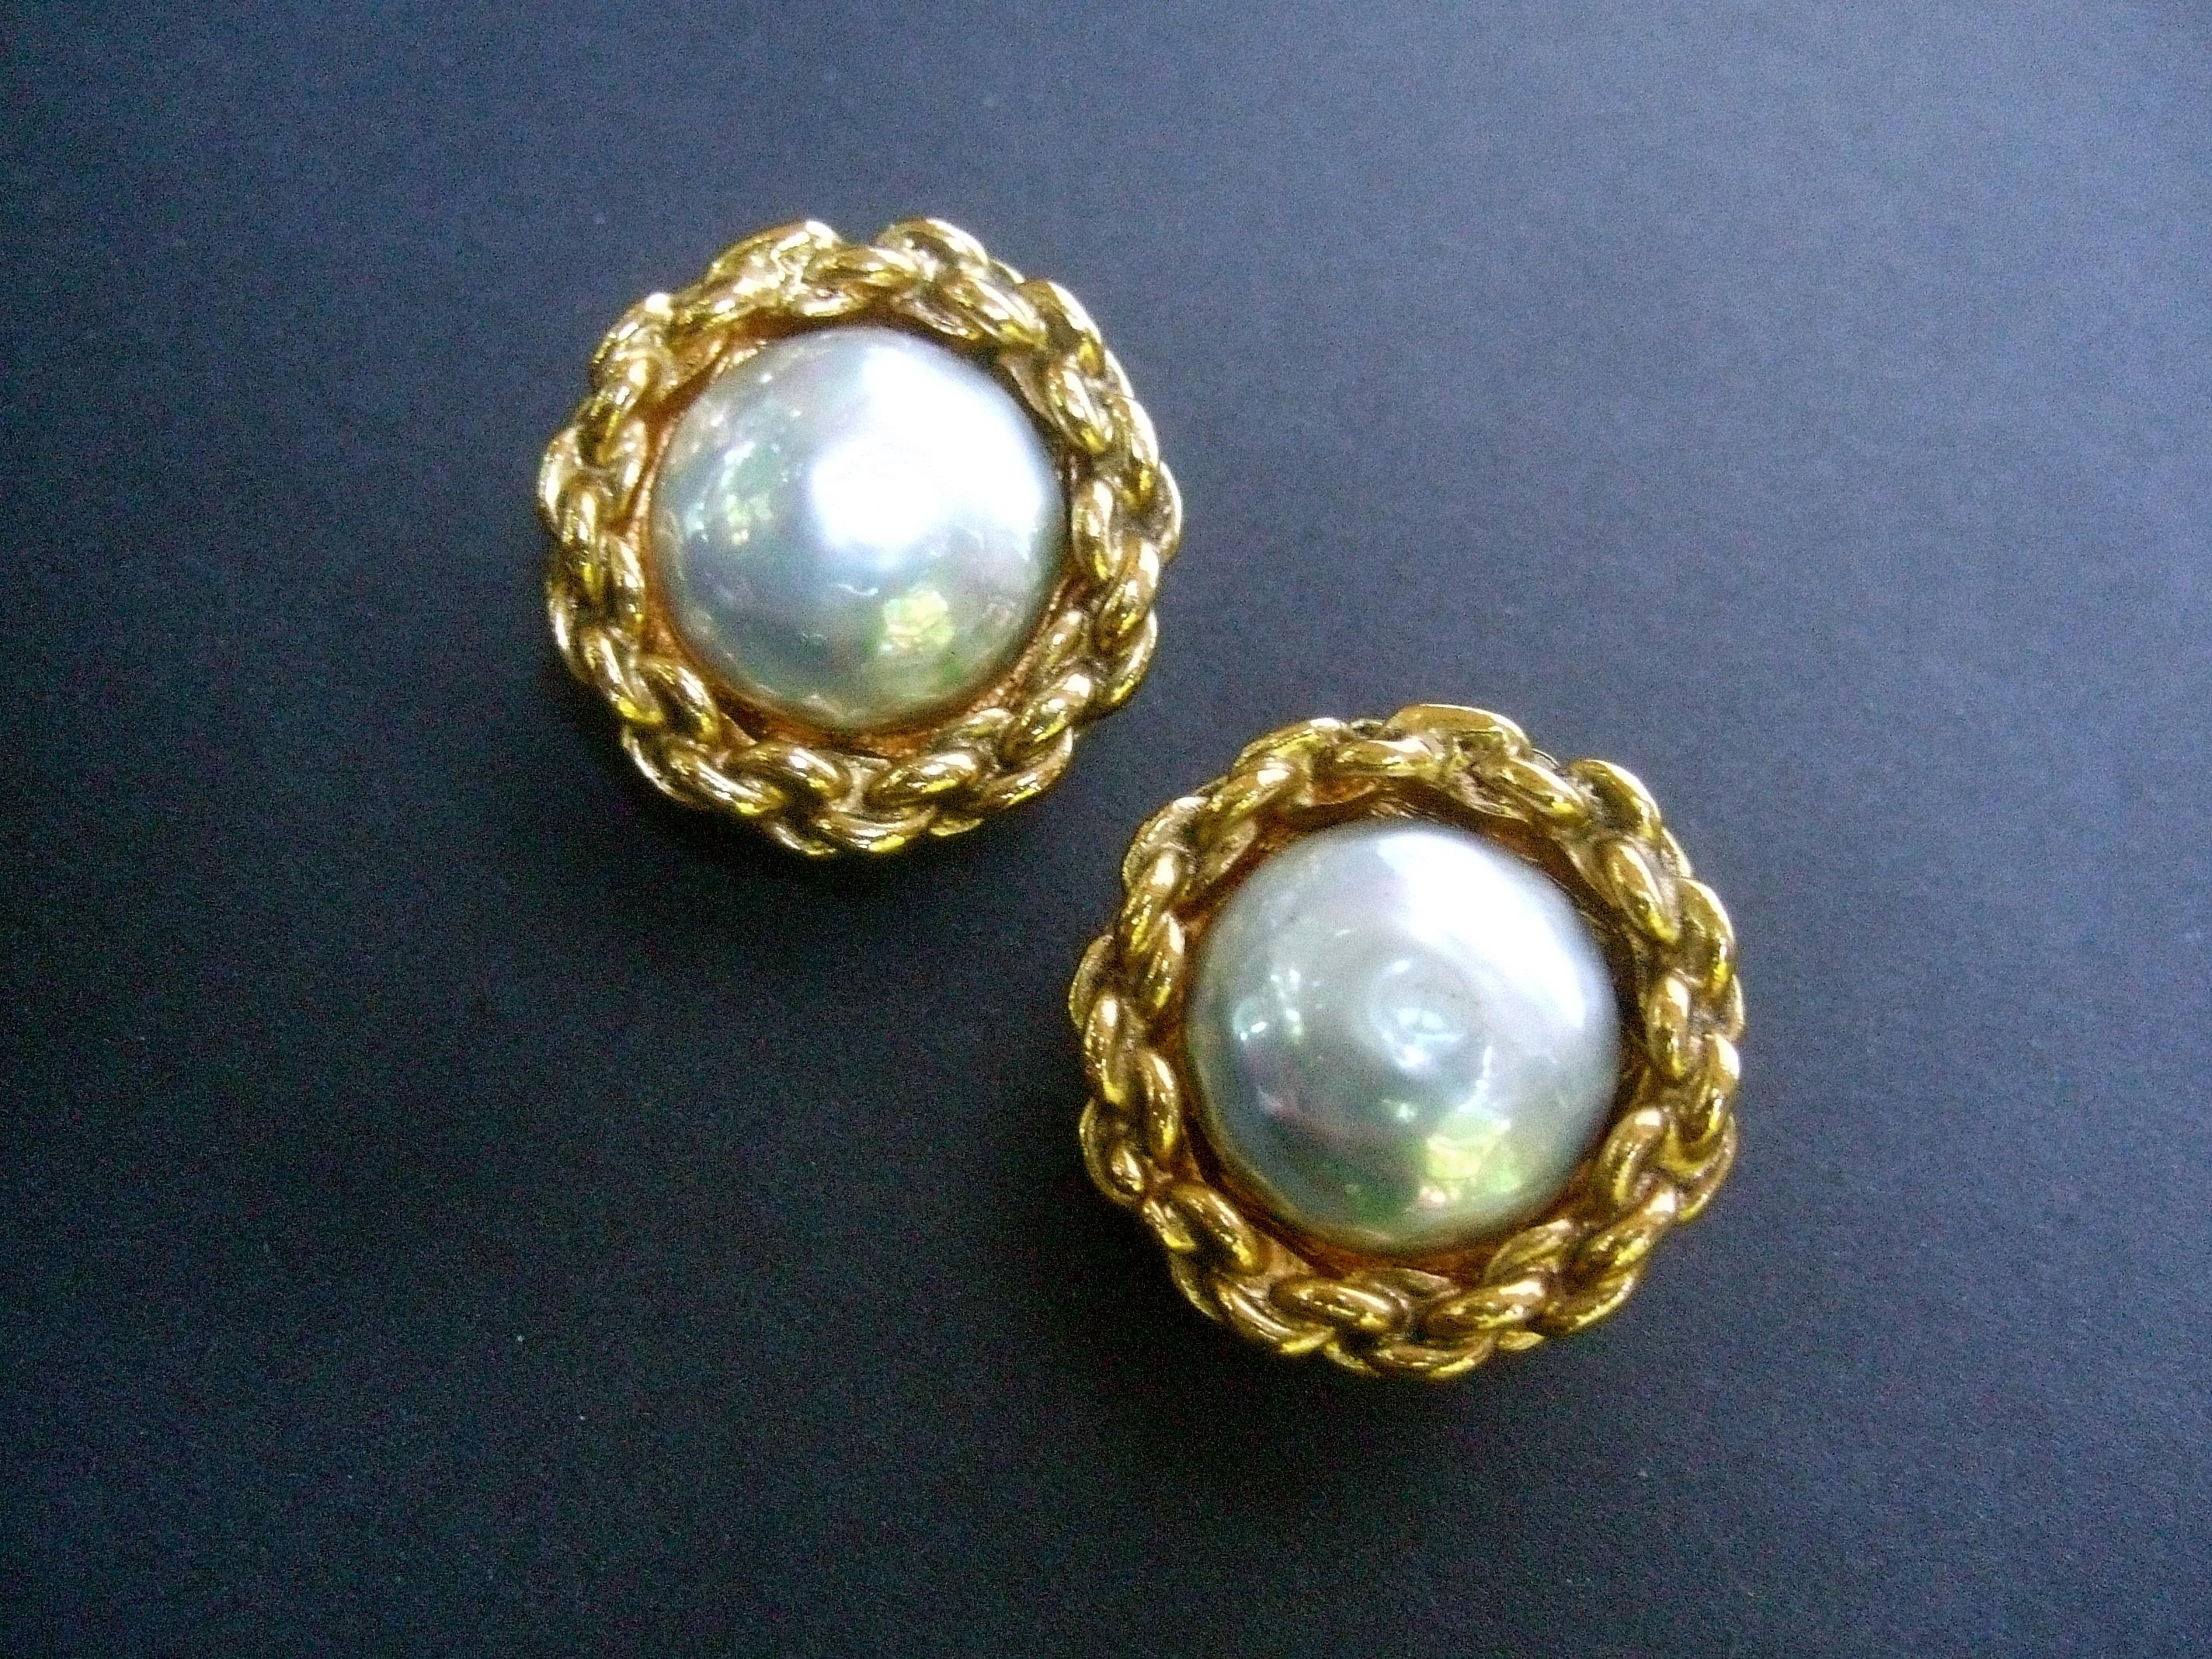 Chanel glass enamel pearl gilt button clip on earrings c 1990s
The classic Chanel glass enamel pearl clip-on earrings
are framed with a gilt metal chain border 

They make an elegant timeless accessory
The back of each earring is stamped: Chanel